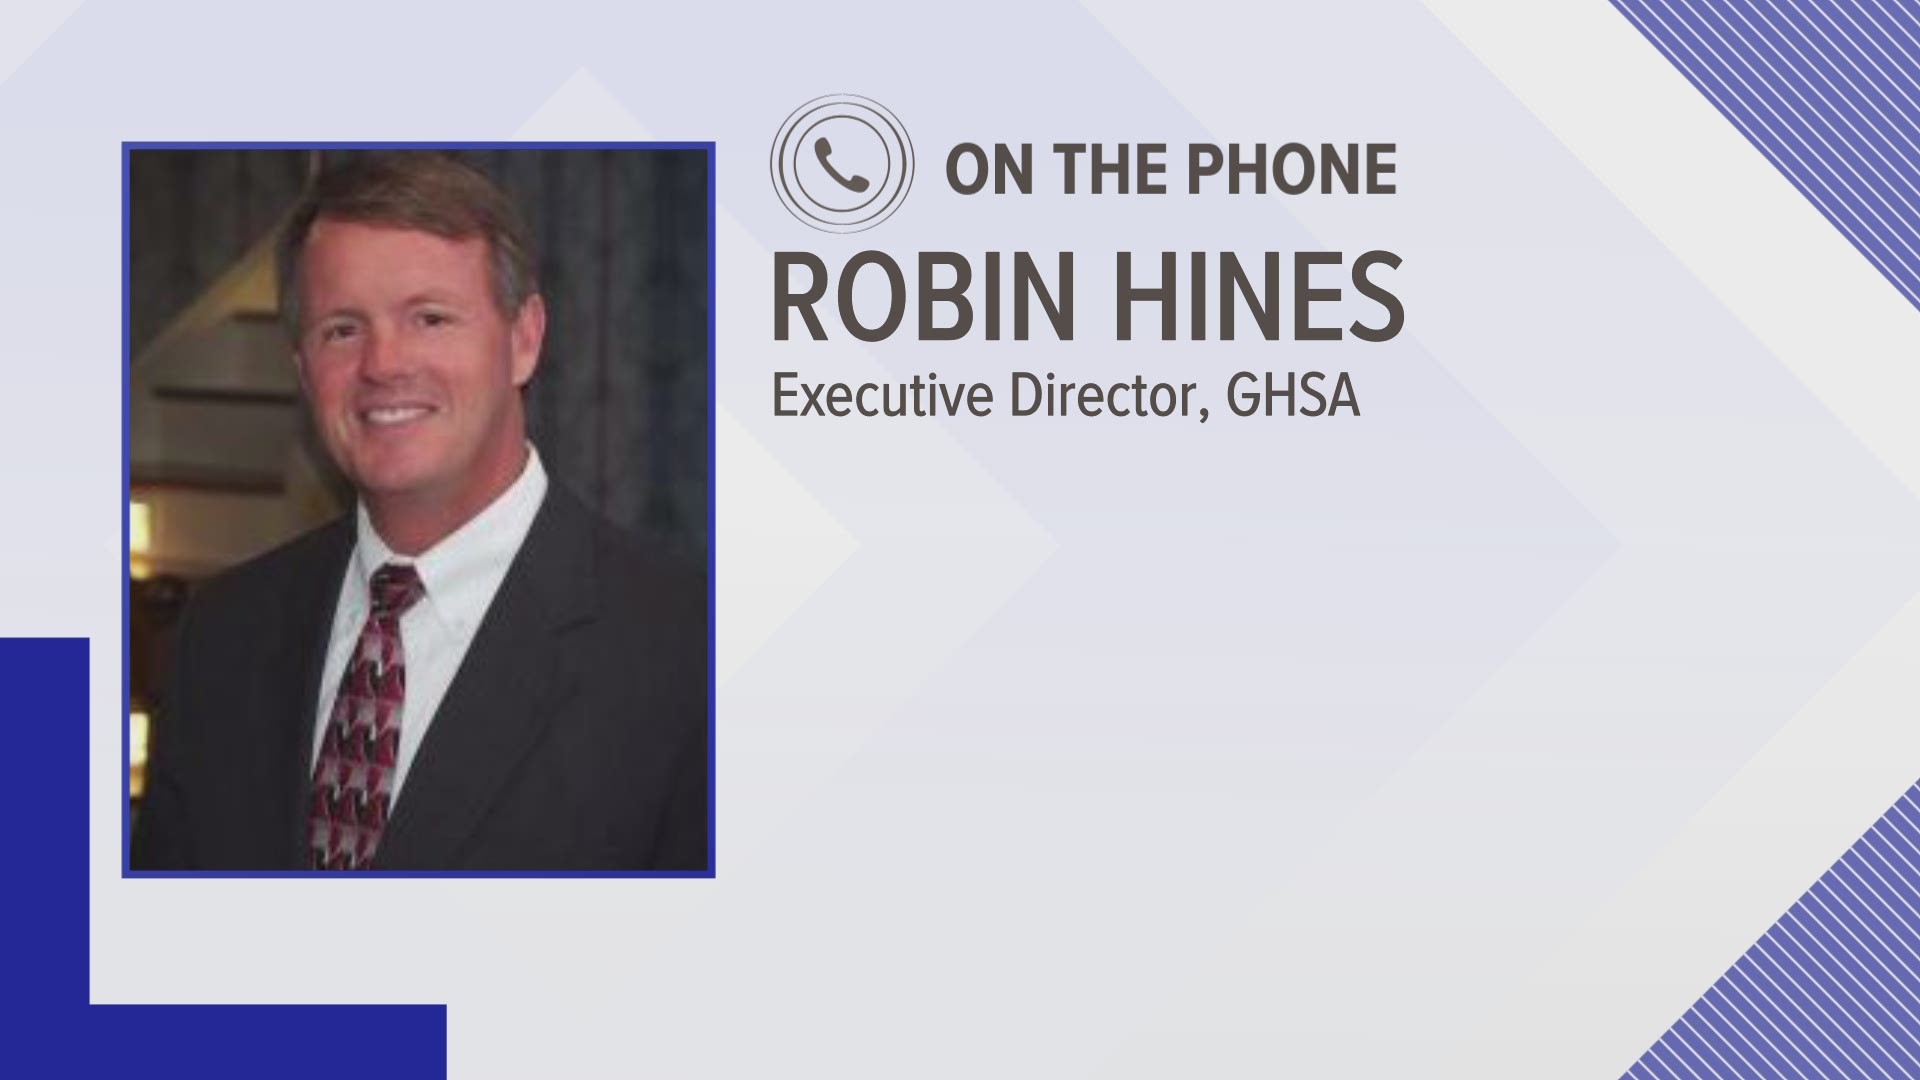 13WMAZ's Marvin James talks with GHSA's Executive Director Robin Hines about allowing athletes to take part in NIL deals.